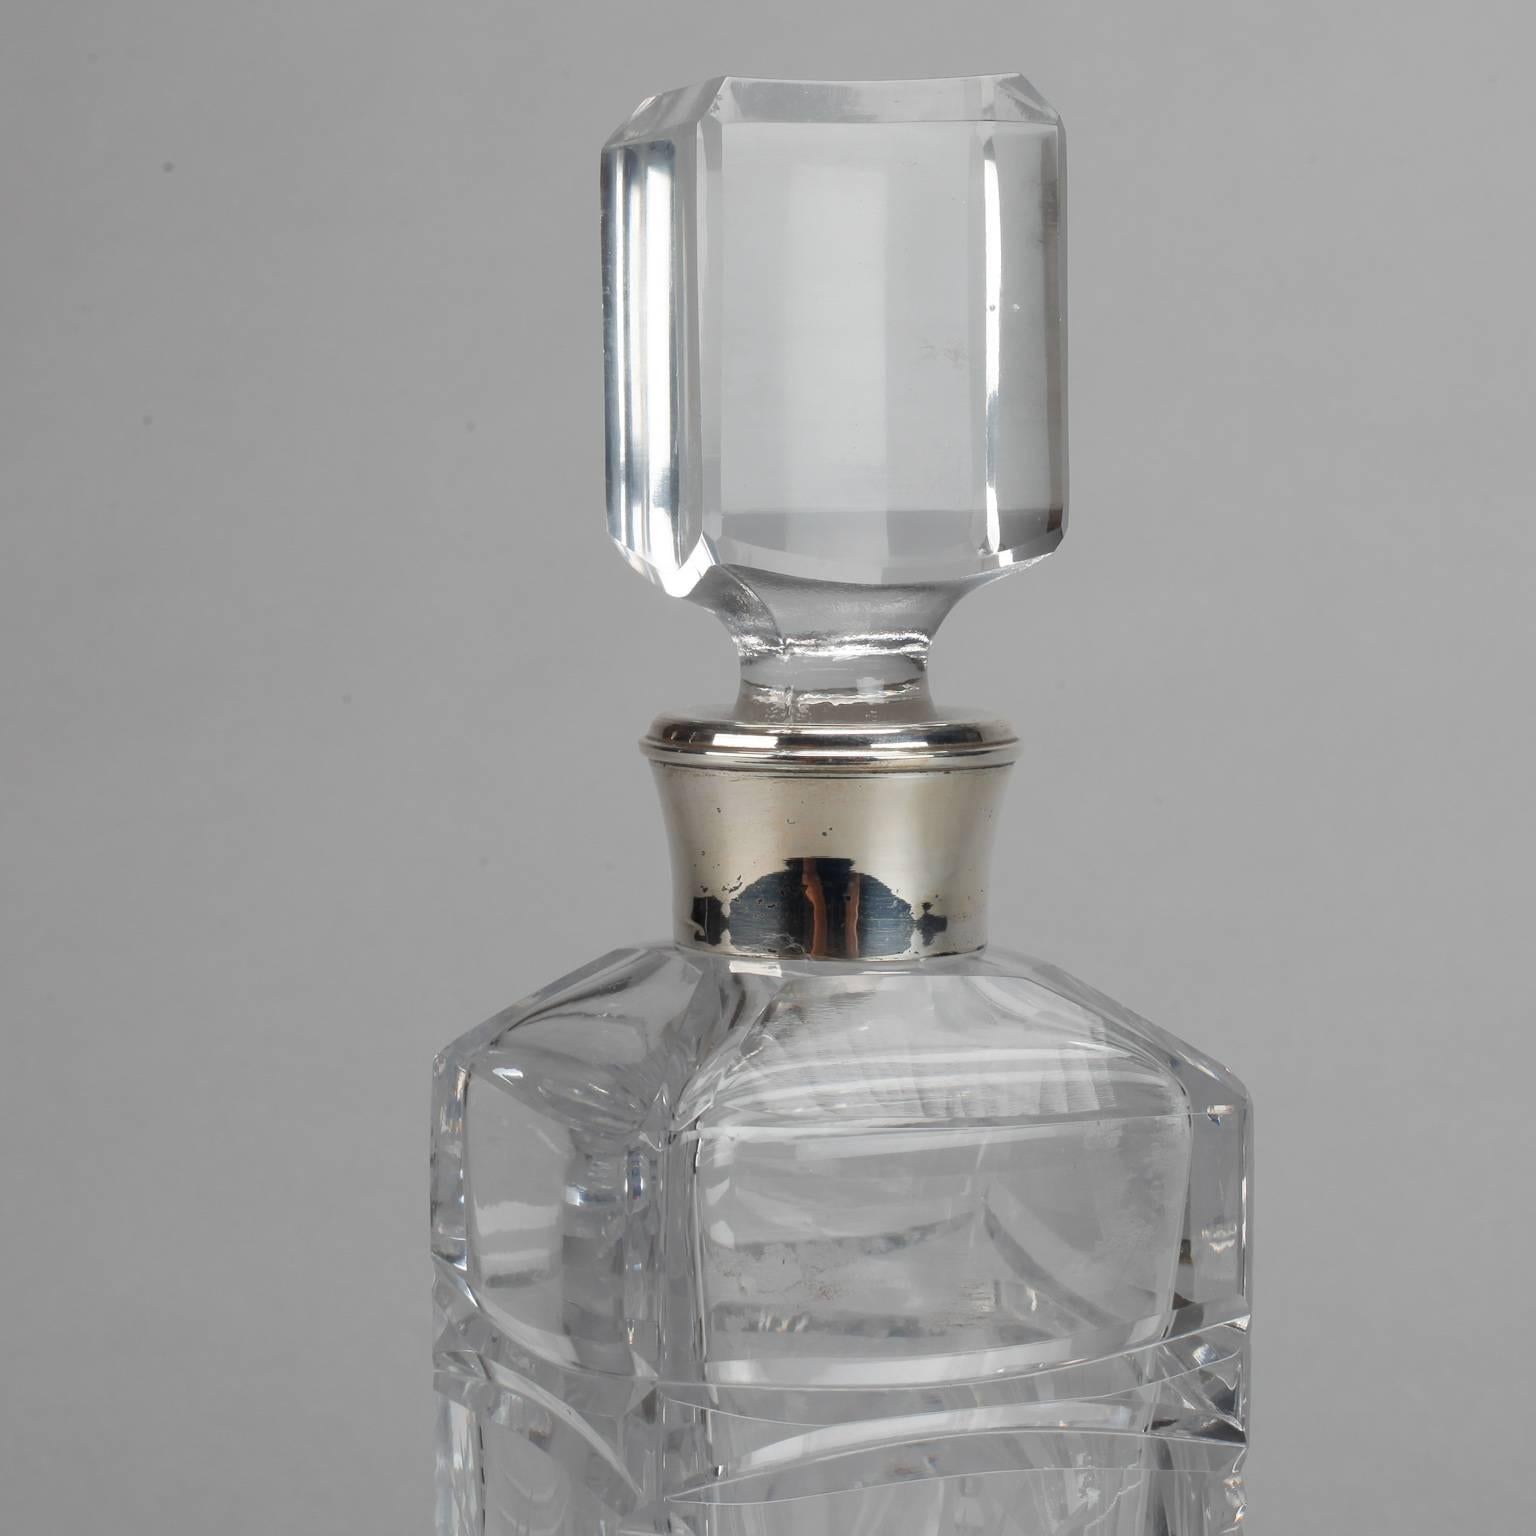 European Heavy Cut Crystal Decanter with Silver